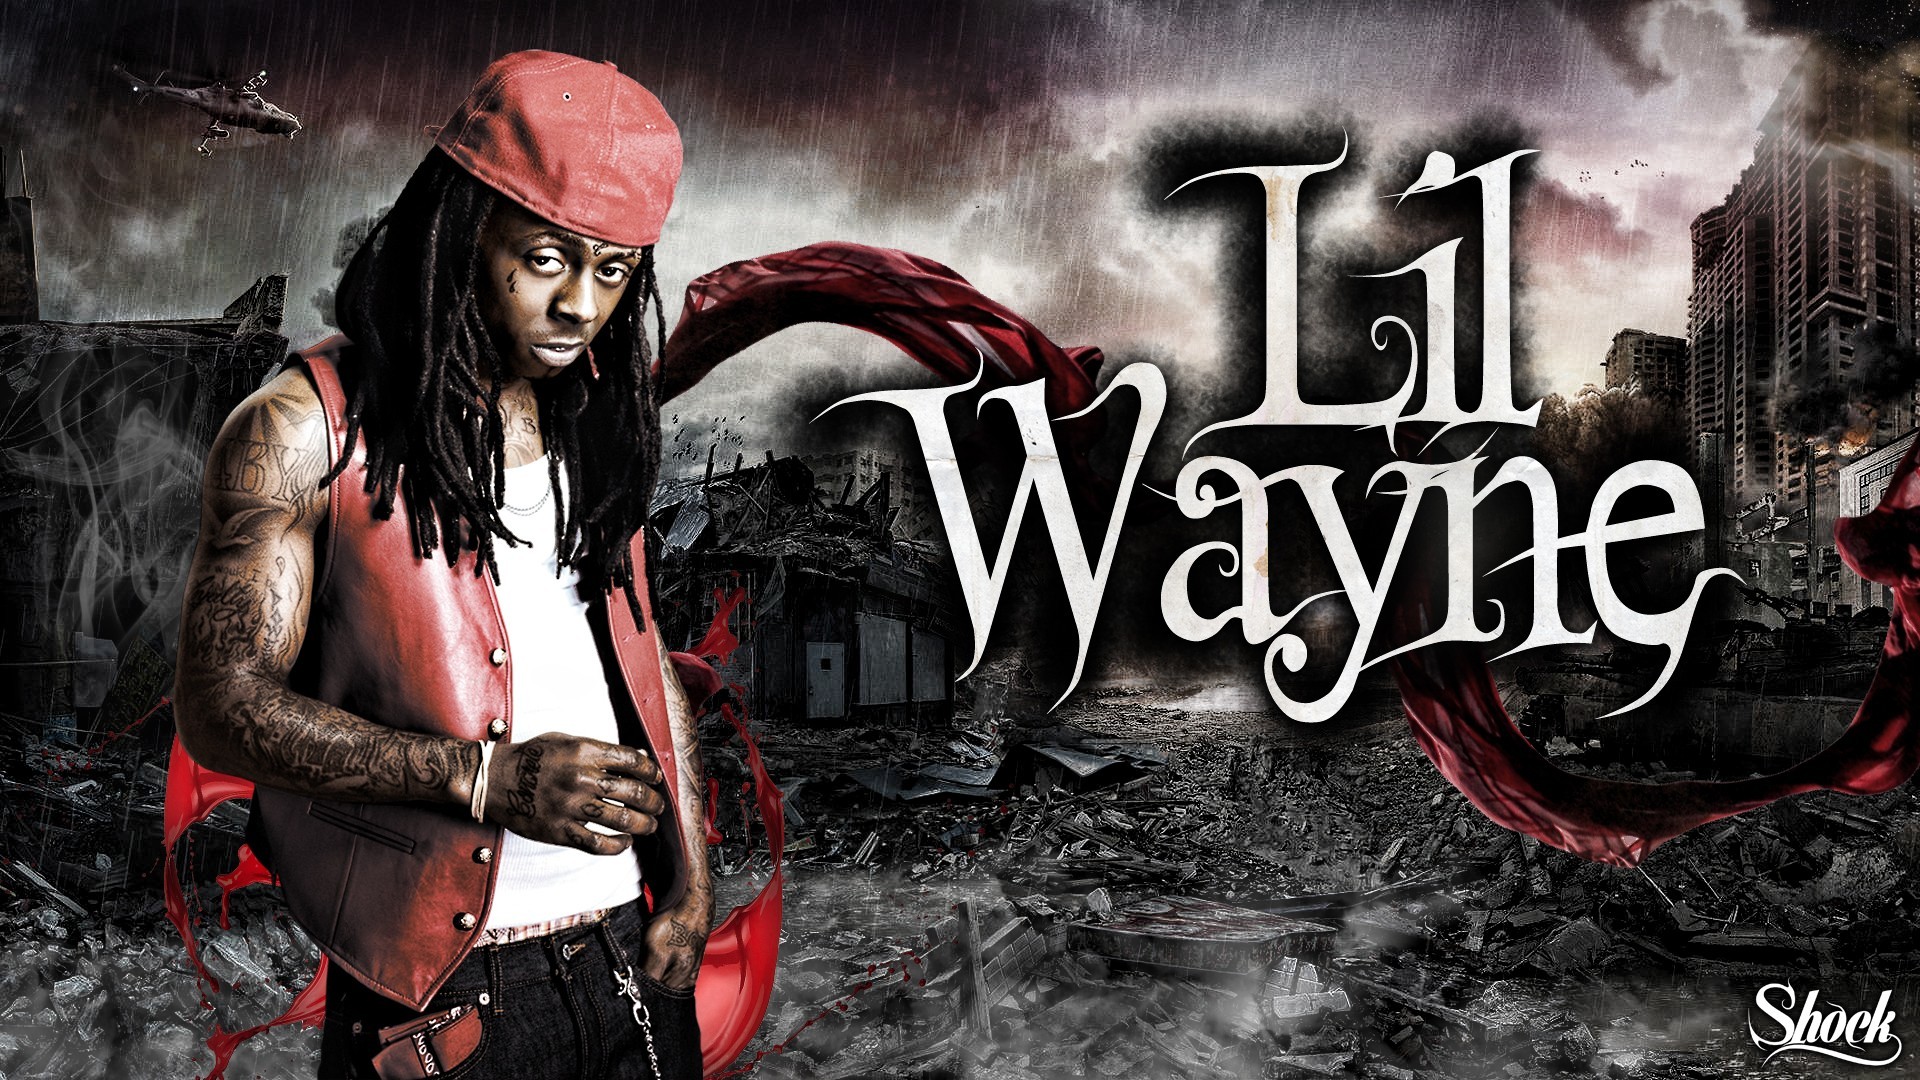 1920x1080 Lil Wayne Wallpapers High Resolution And Quality